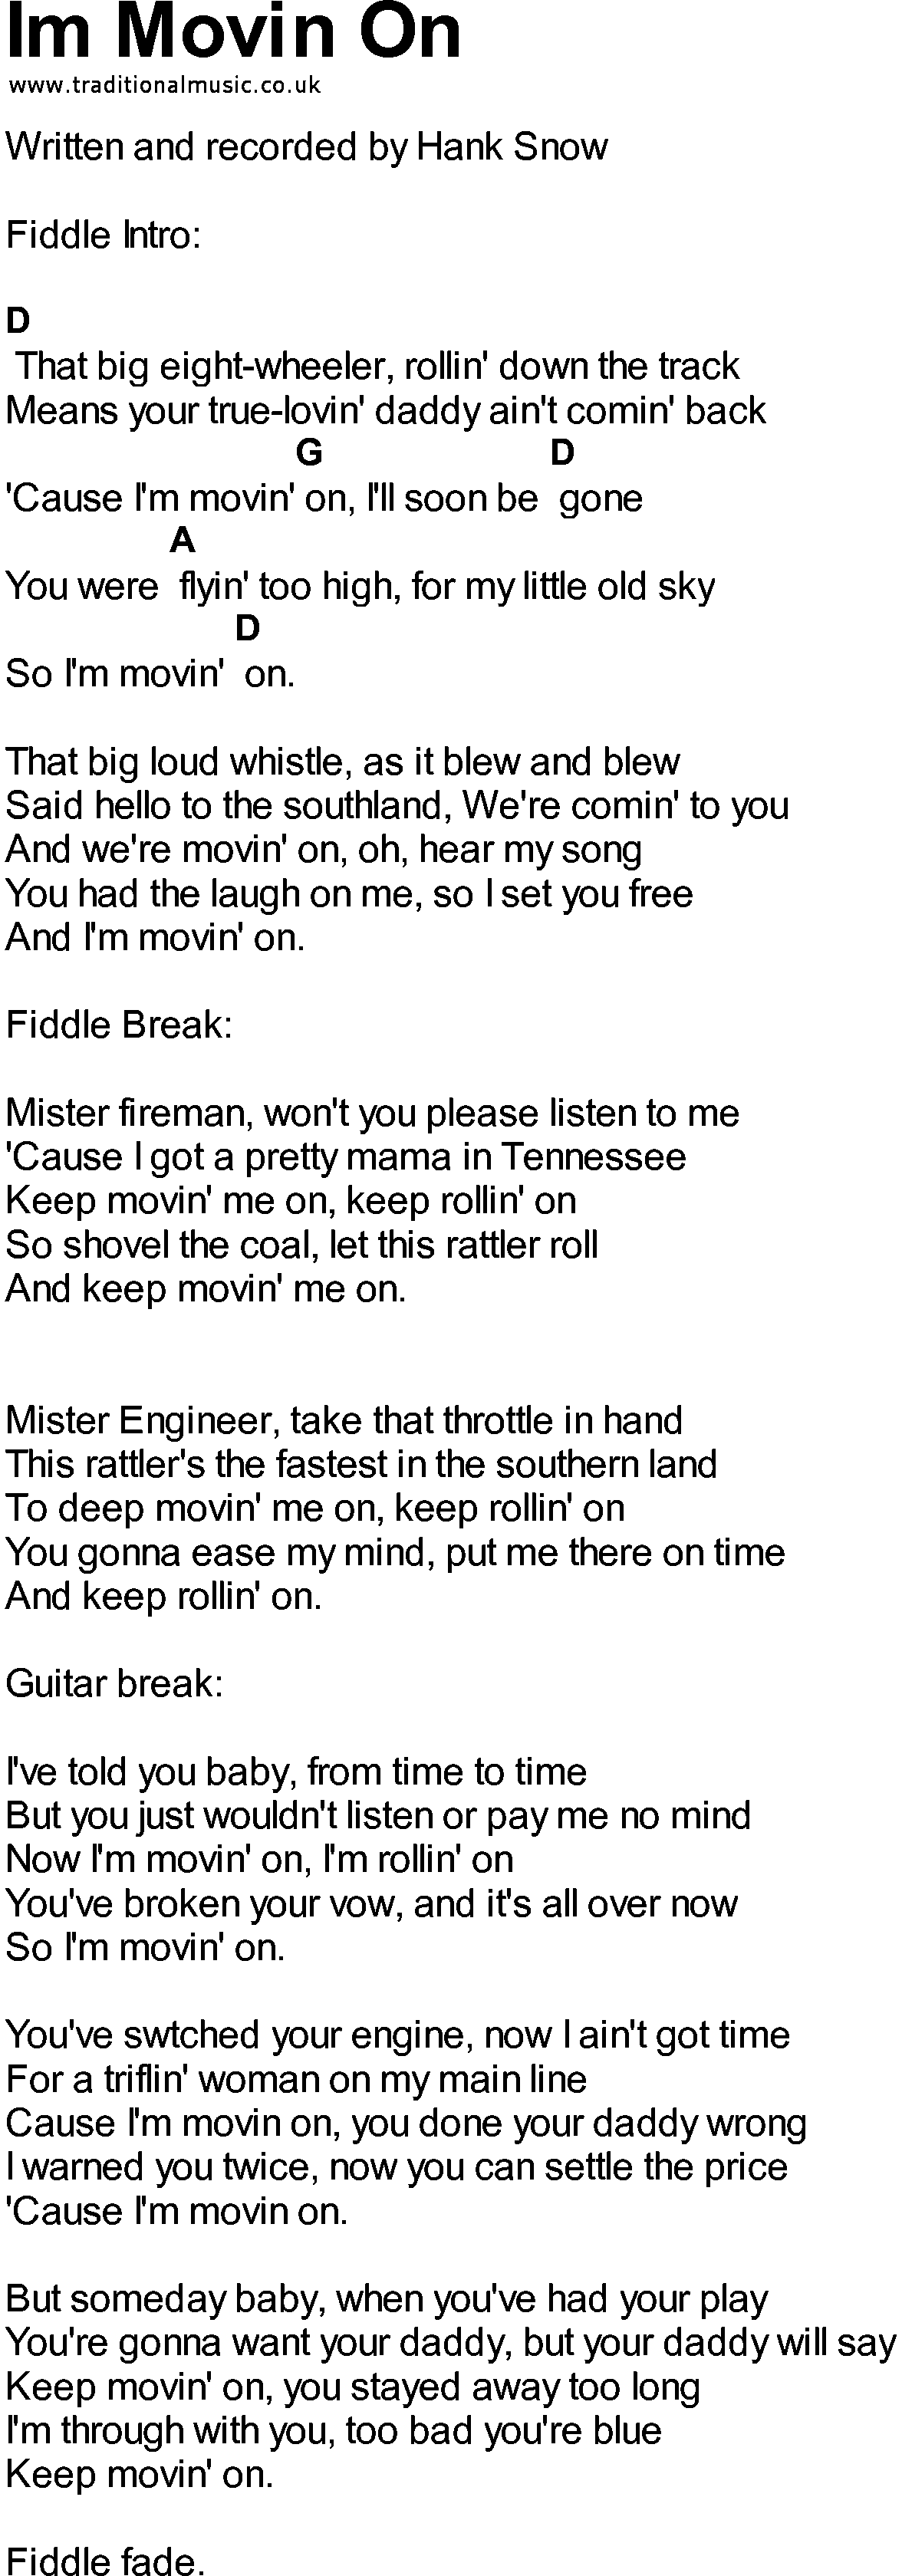 Bluegrass songs with chords - Im Movin On